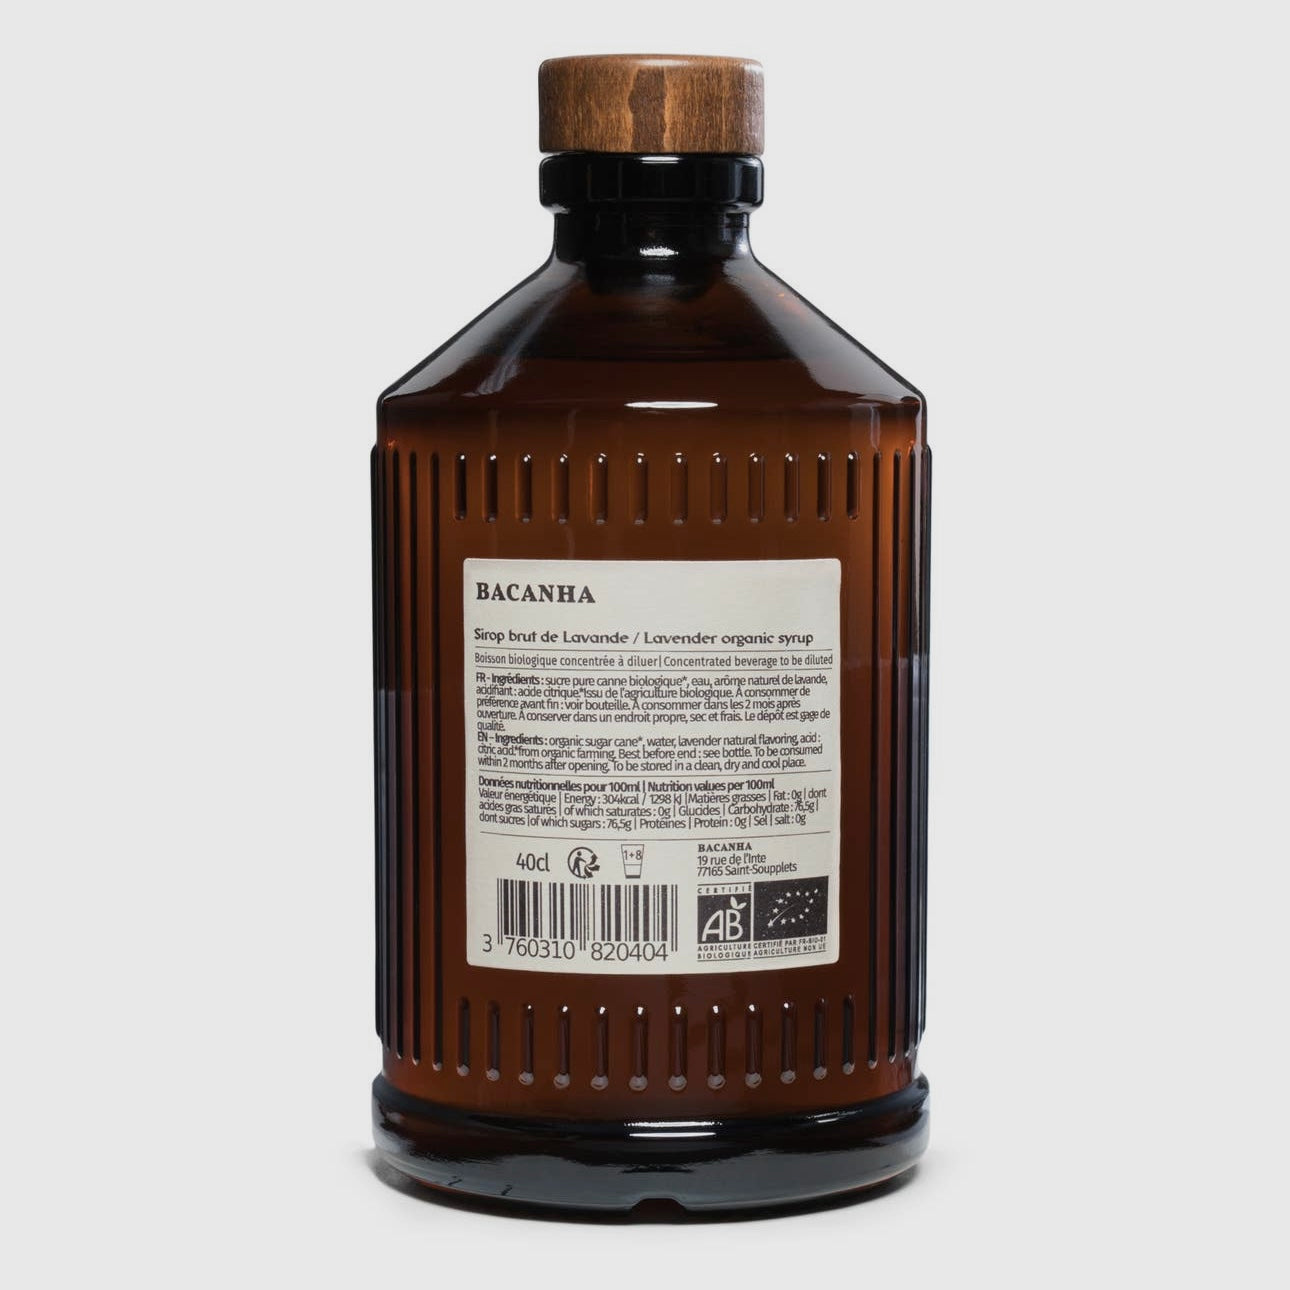 FRENCH ORGANIC SYRUP